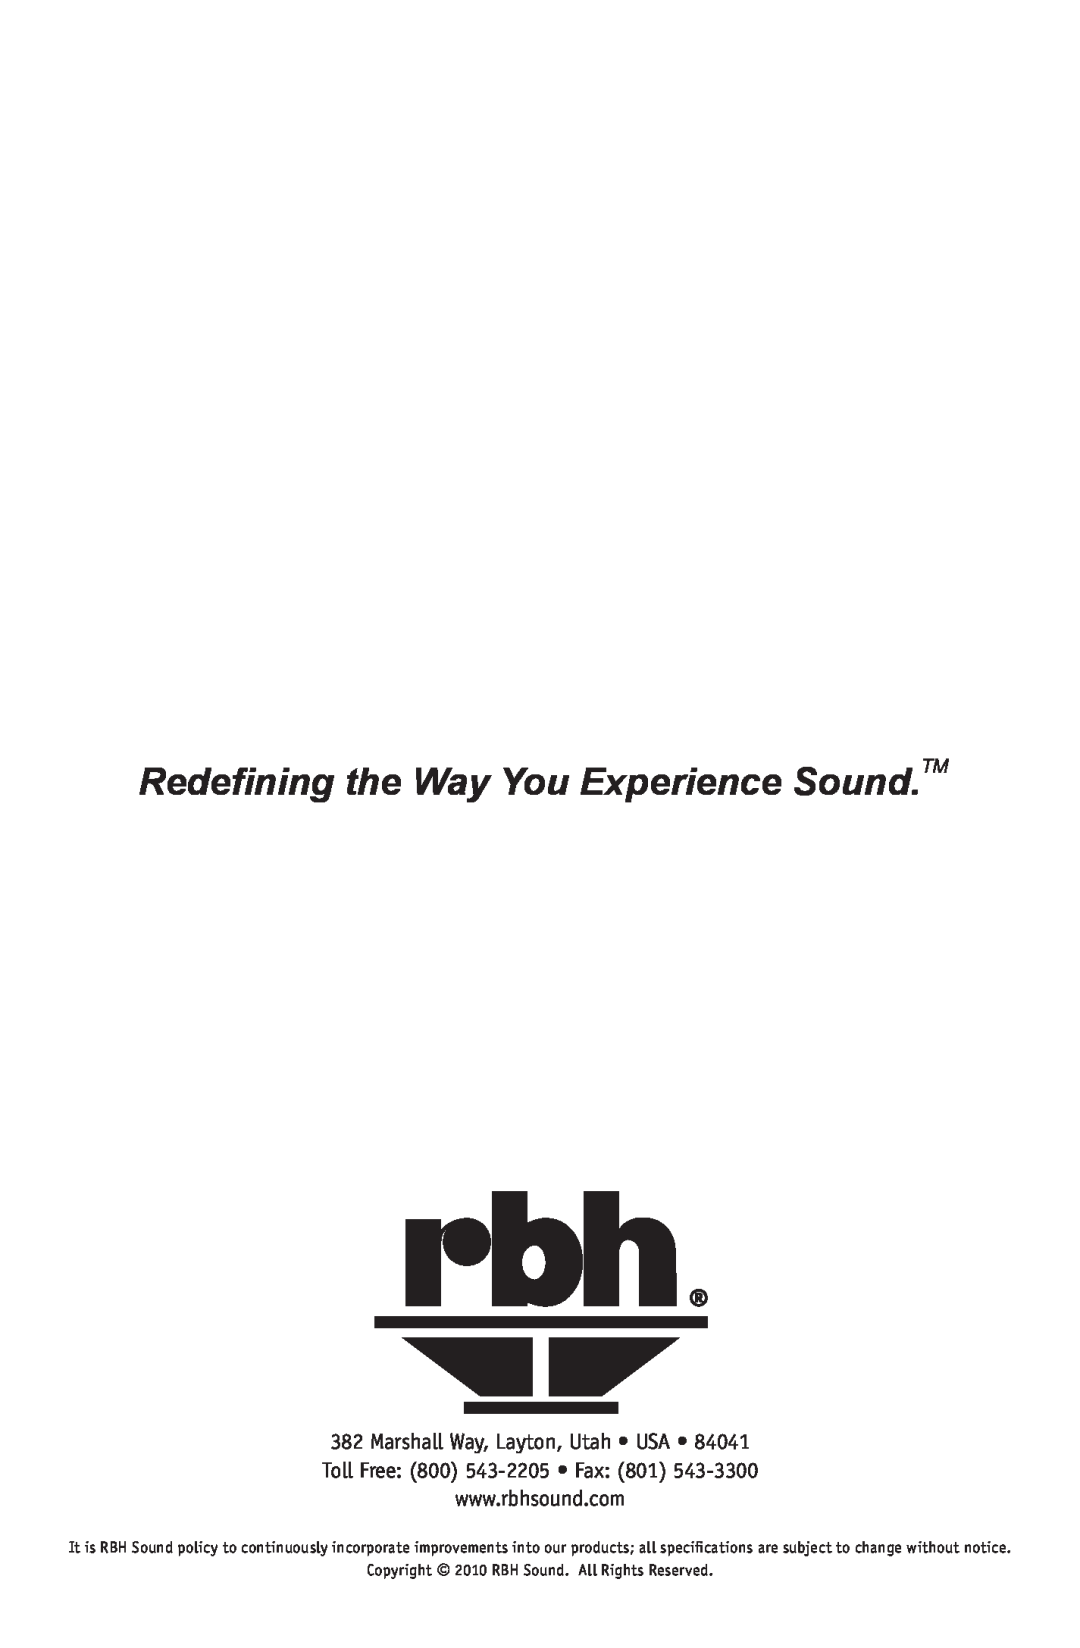 RBH Sound QM-615 operation manual Redefining the Way You Experience Sound.TM, Copyright 2010 RBH Sound. All Rights Reserved 